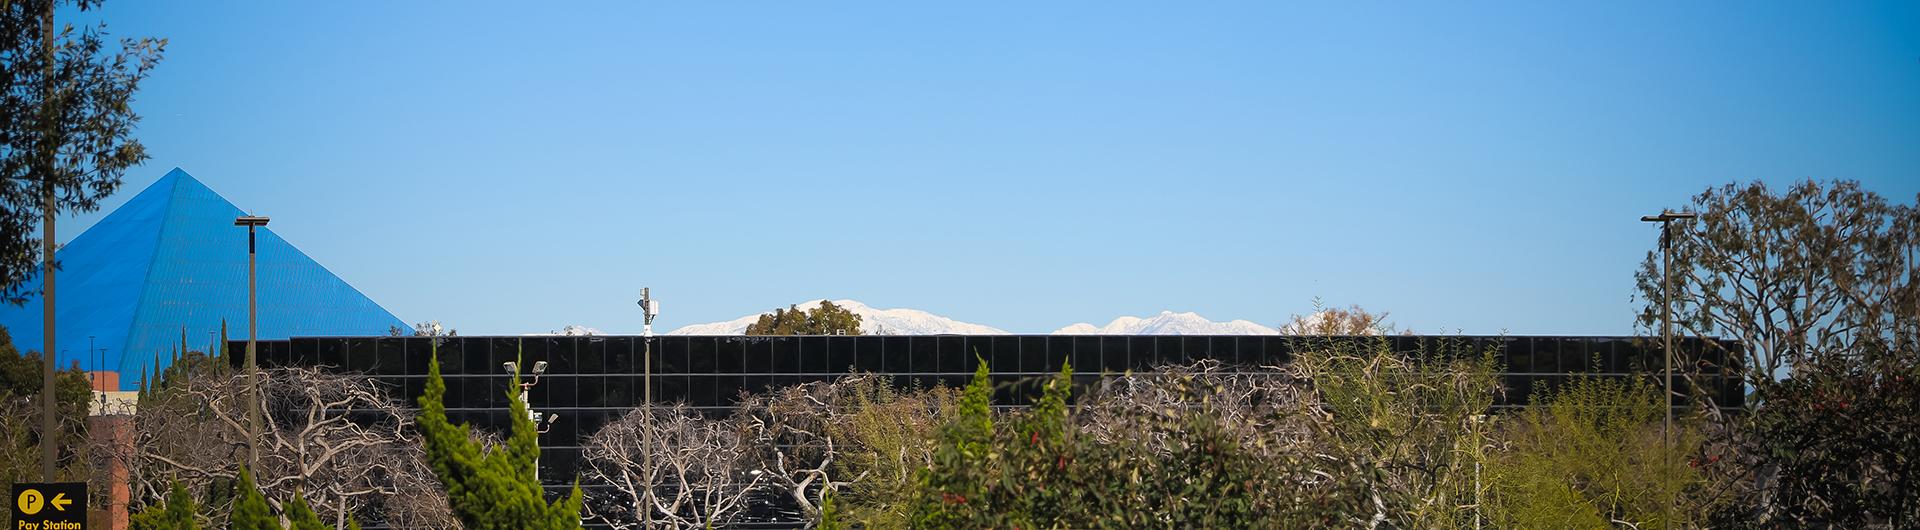 Banner PHOTO of campus includes pyramid and corn on the cob building